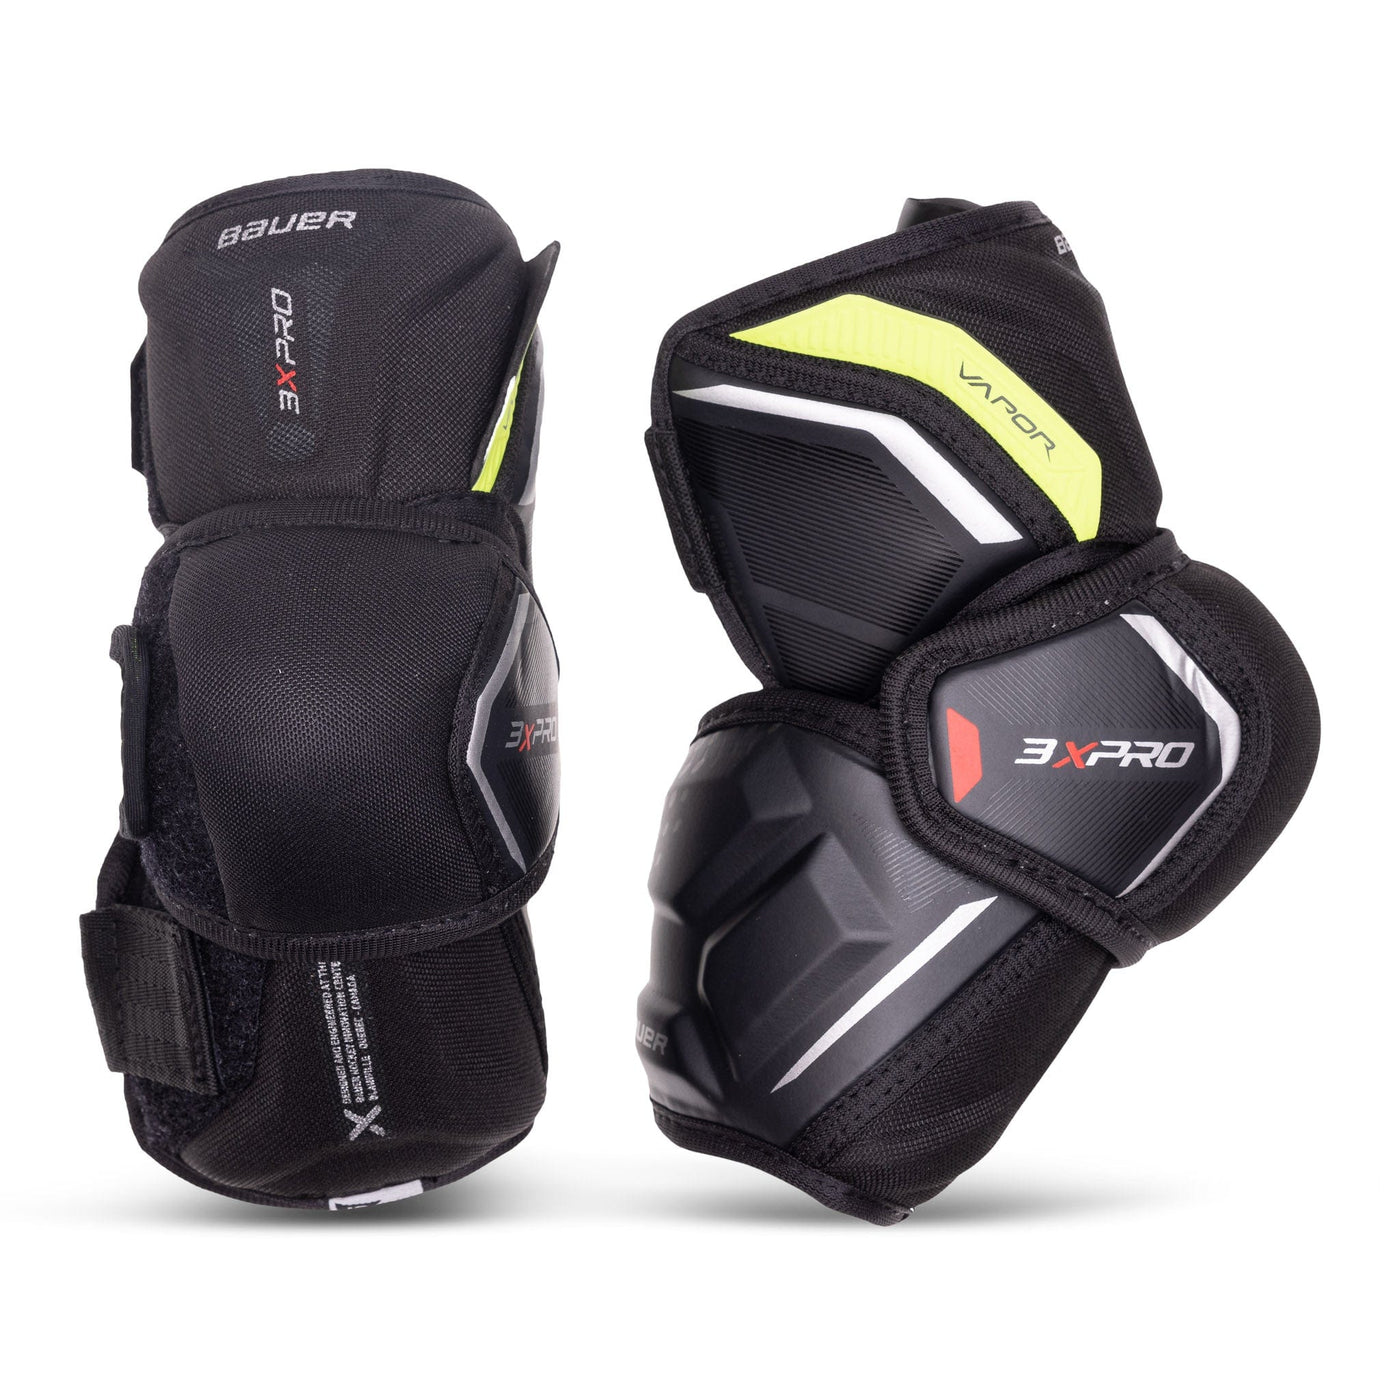 Bauer Elbow Pad Size Chart and Sizing Guide for Hockey